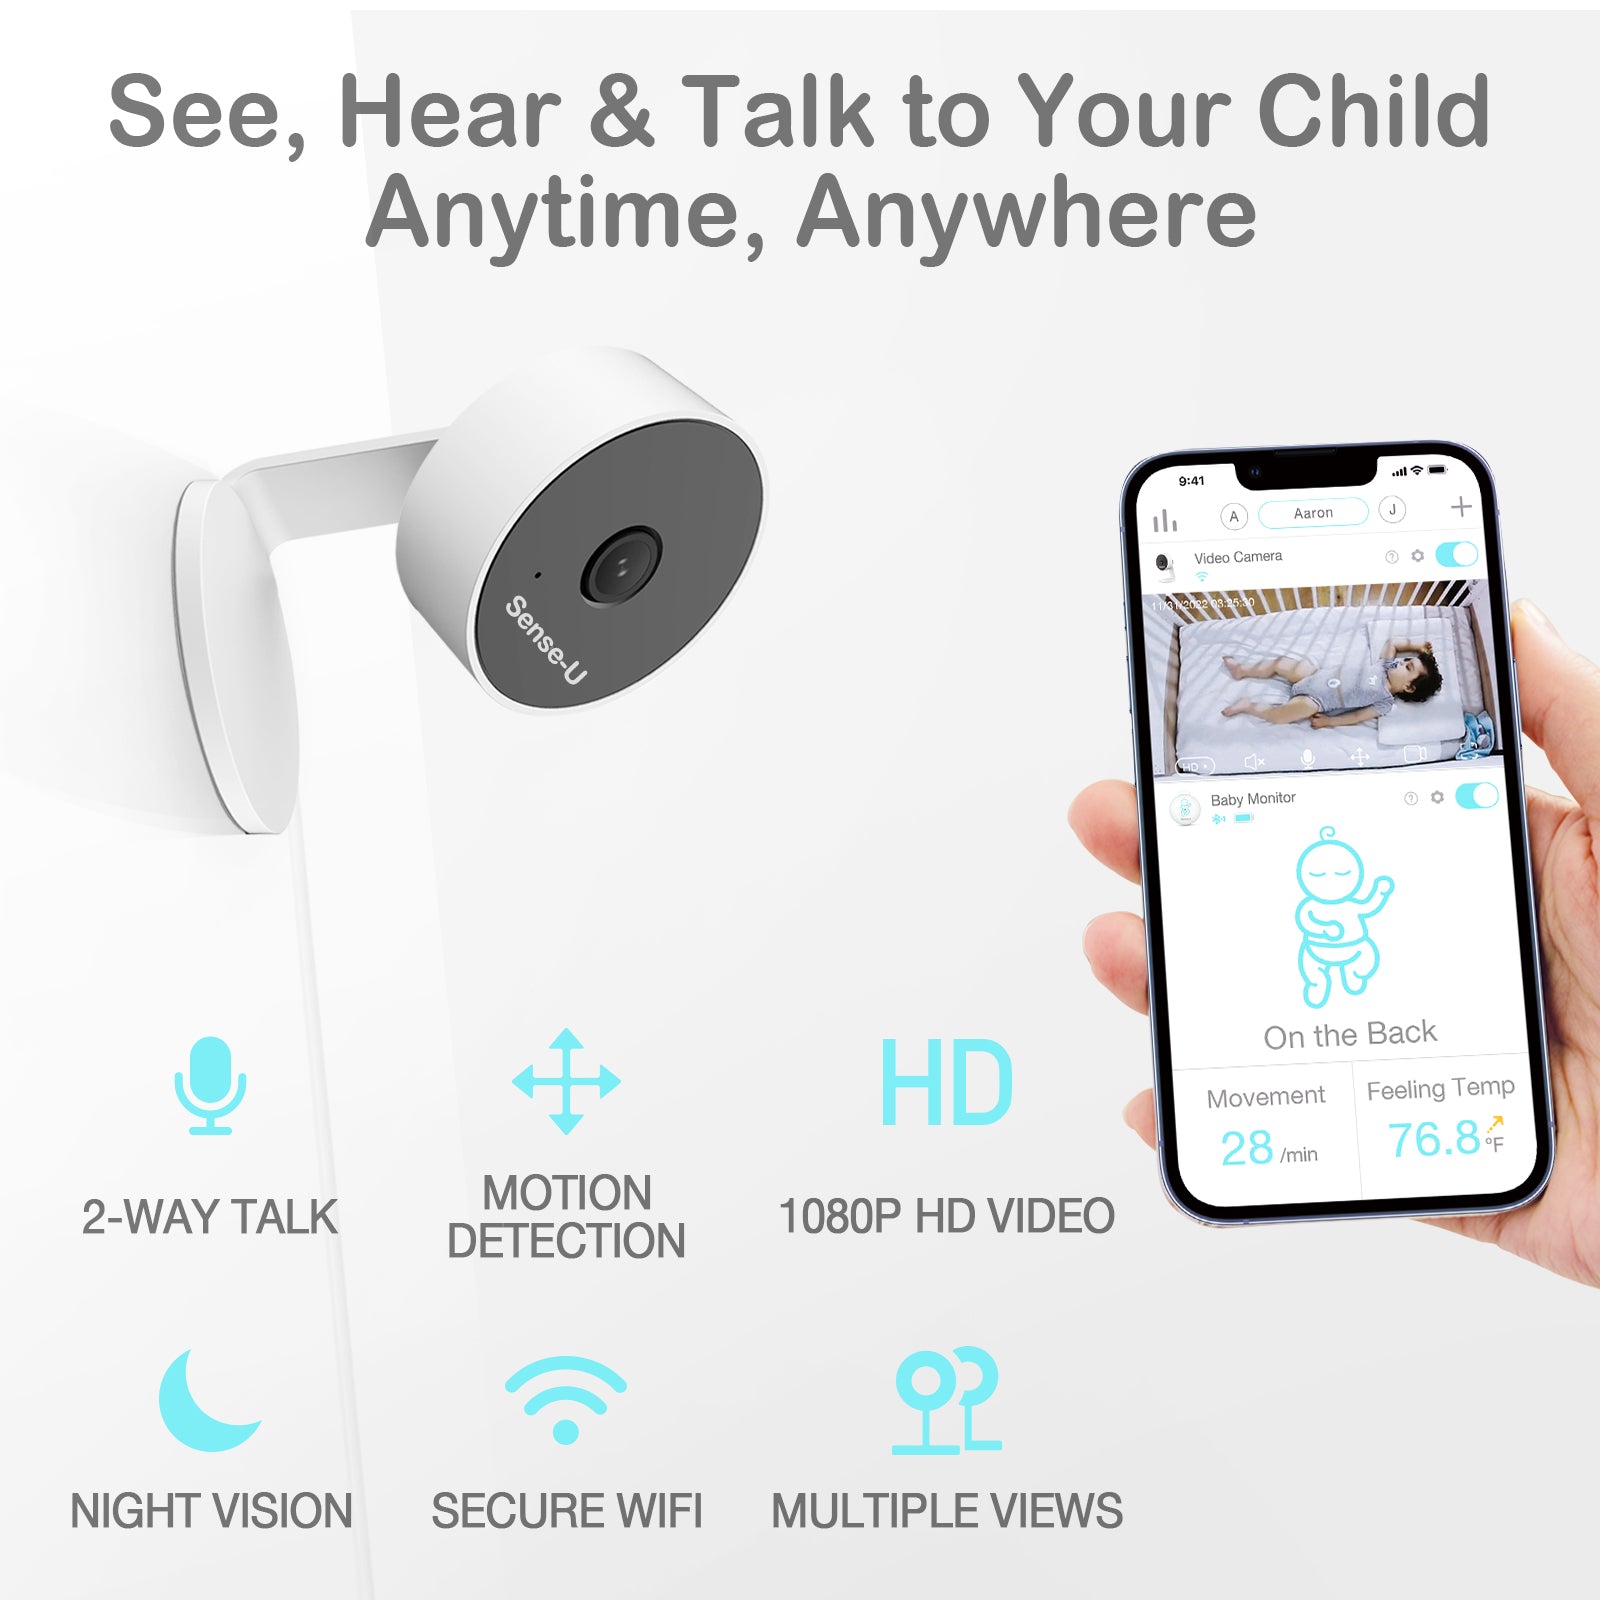 Sense-U HD Video Baby Monitor with 1080P HD WiFi Camera and Background Audio, Night Vision, 2-Way Talk, Motion Detection & No Monthly Fee (Compatible Smart Baby Monitor) - image 2 of 7